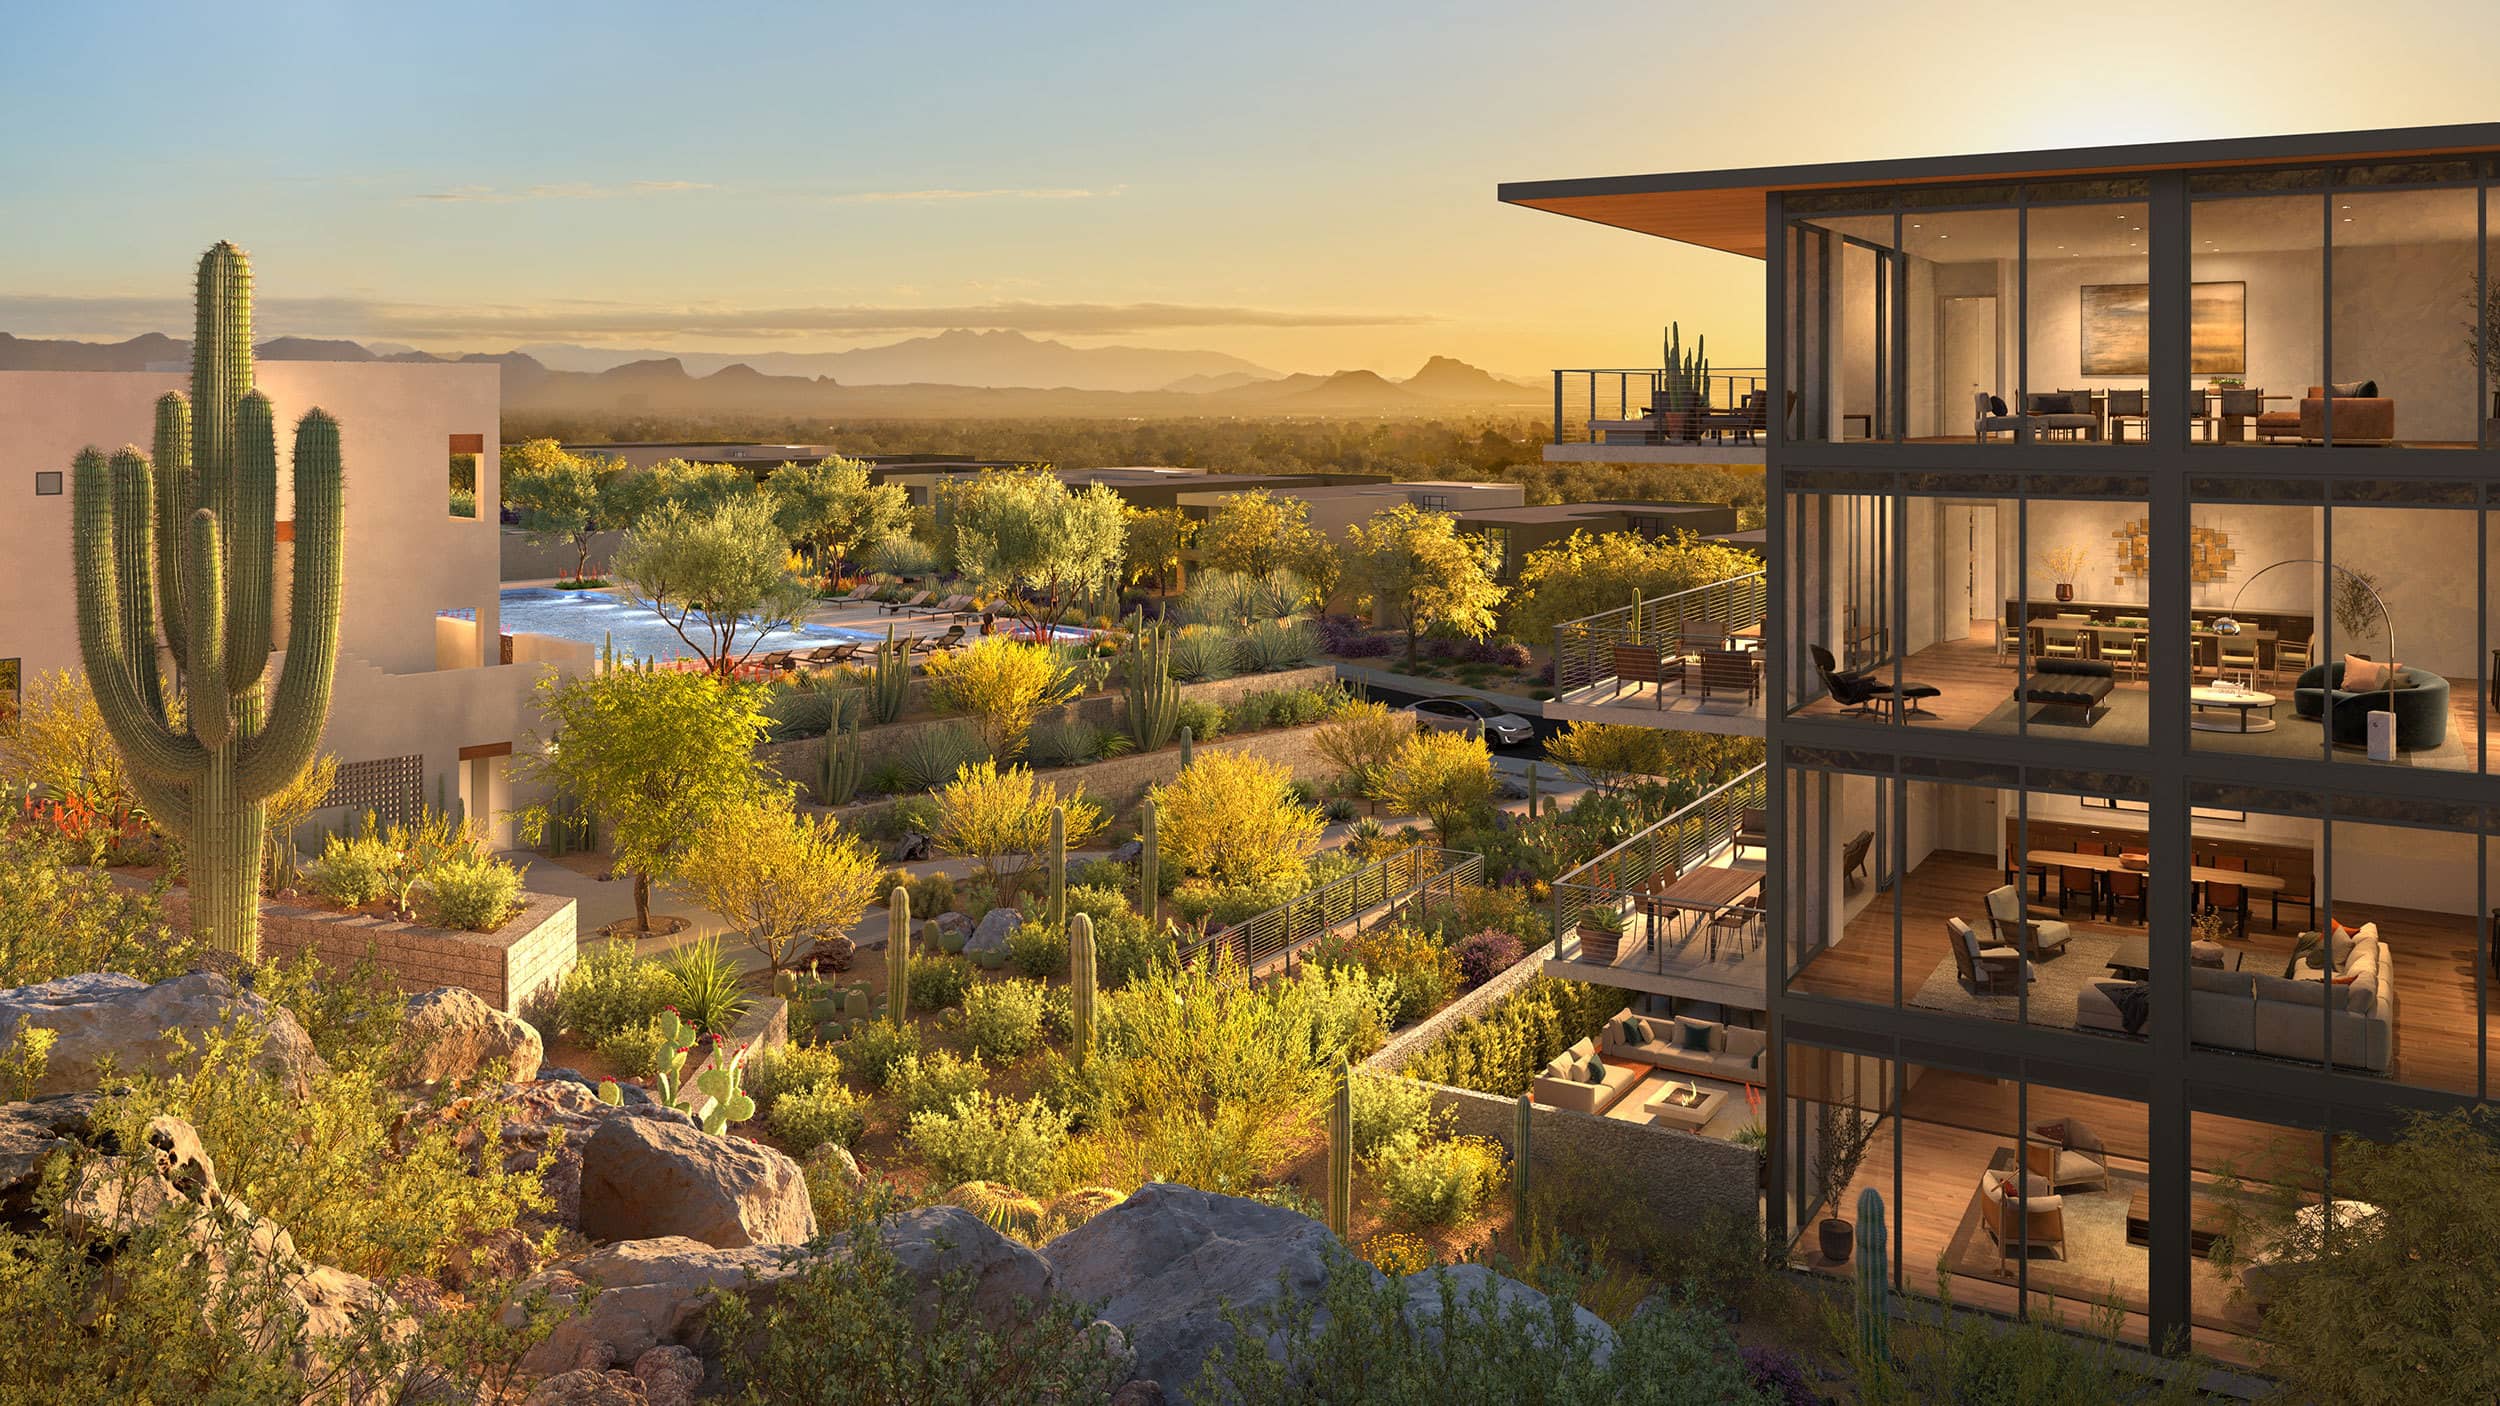 ASCENT AT THE PHOENICIAN® BREAKS GROUND ON MOUNTAINSIDE RESIDENCES